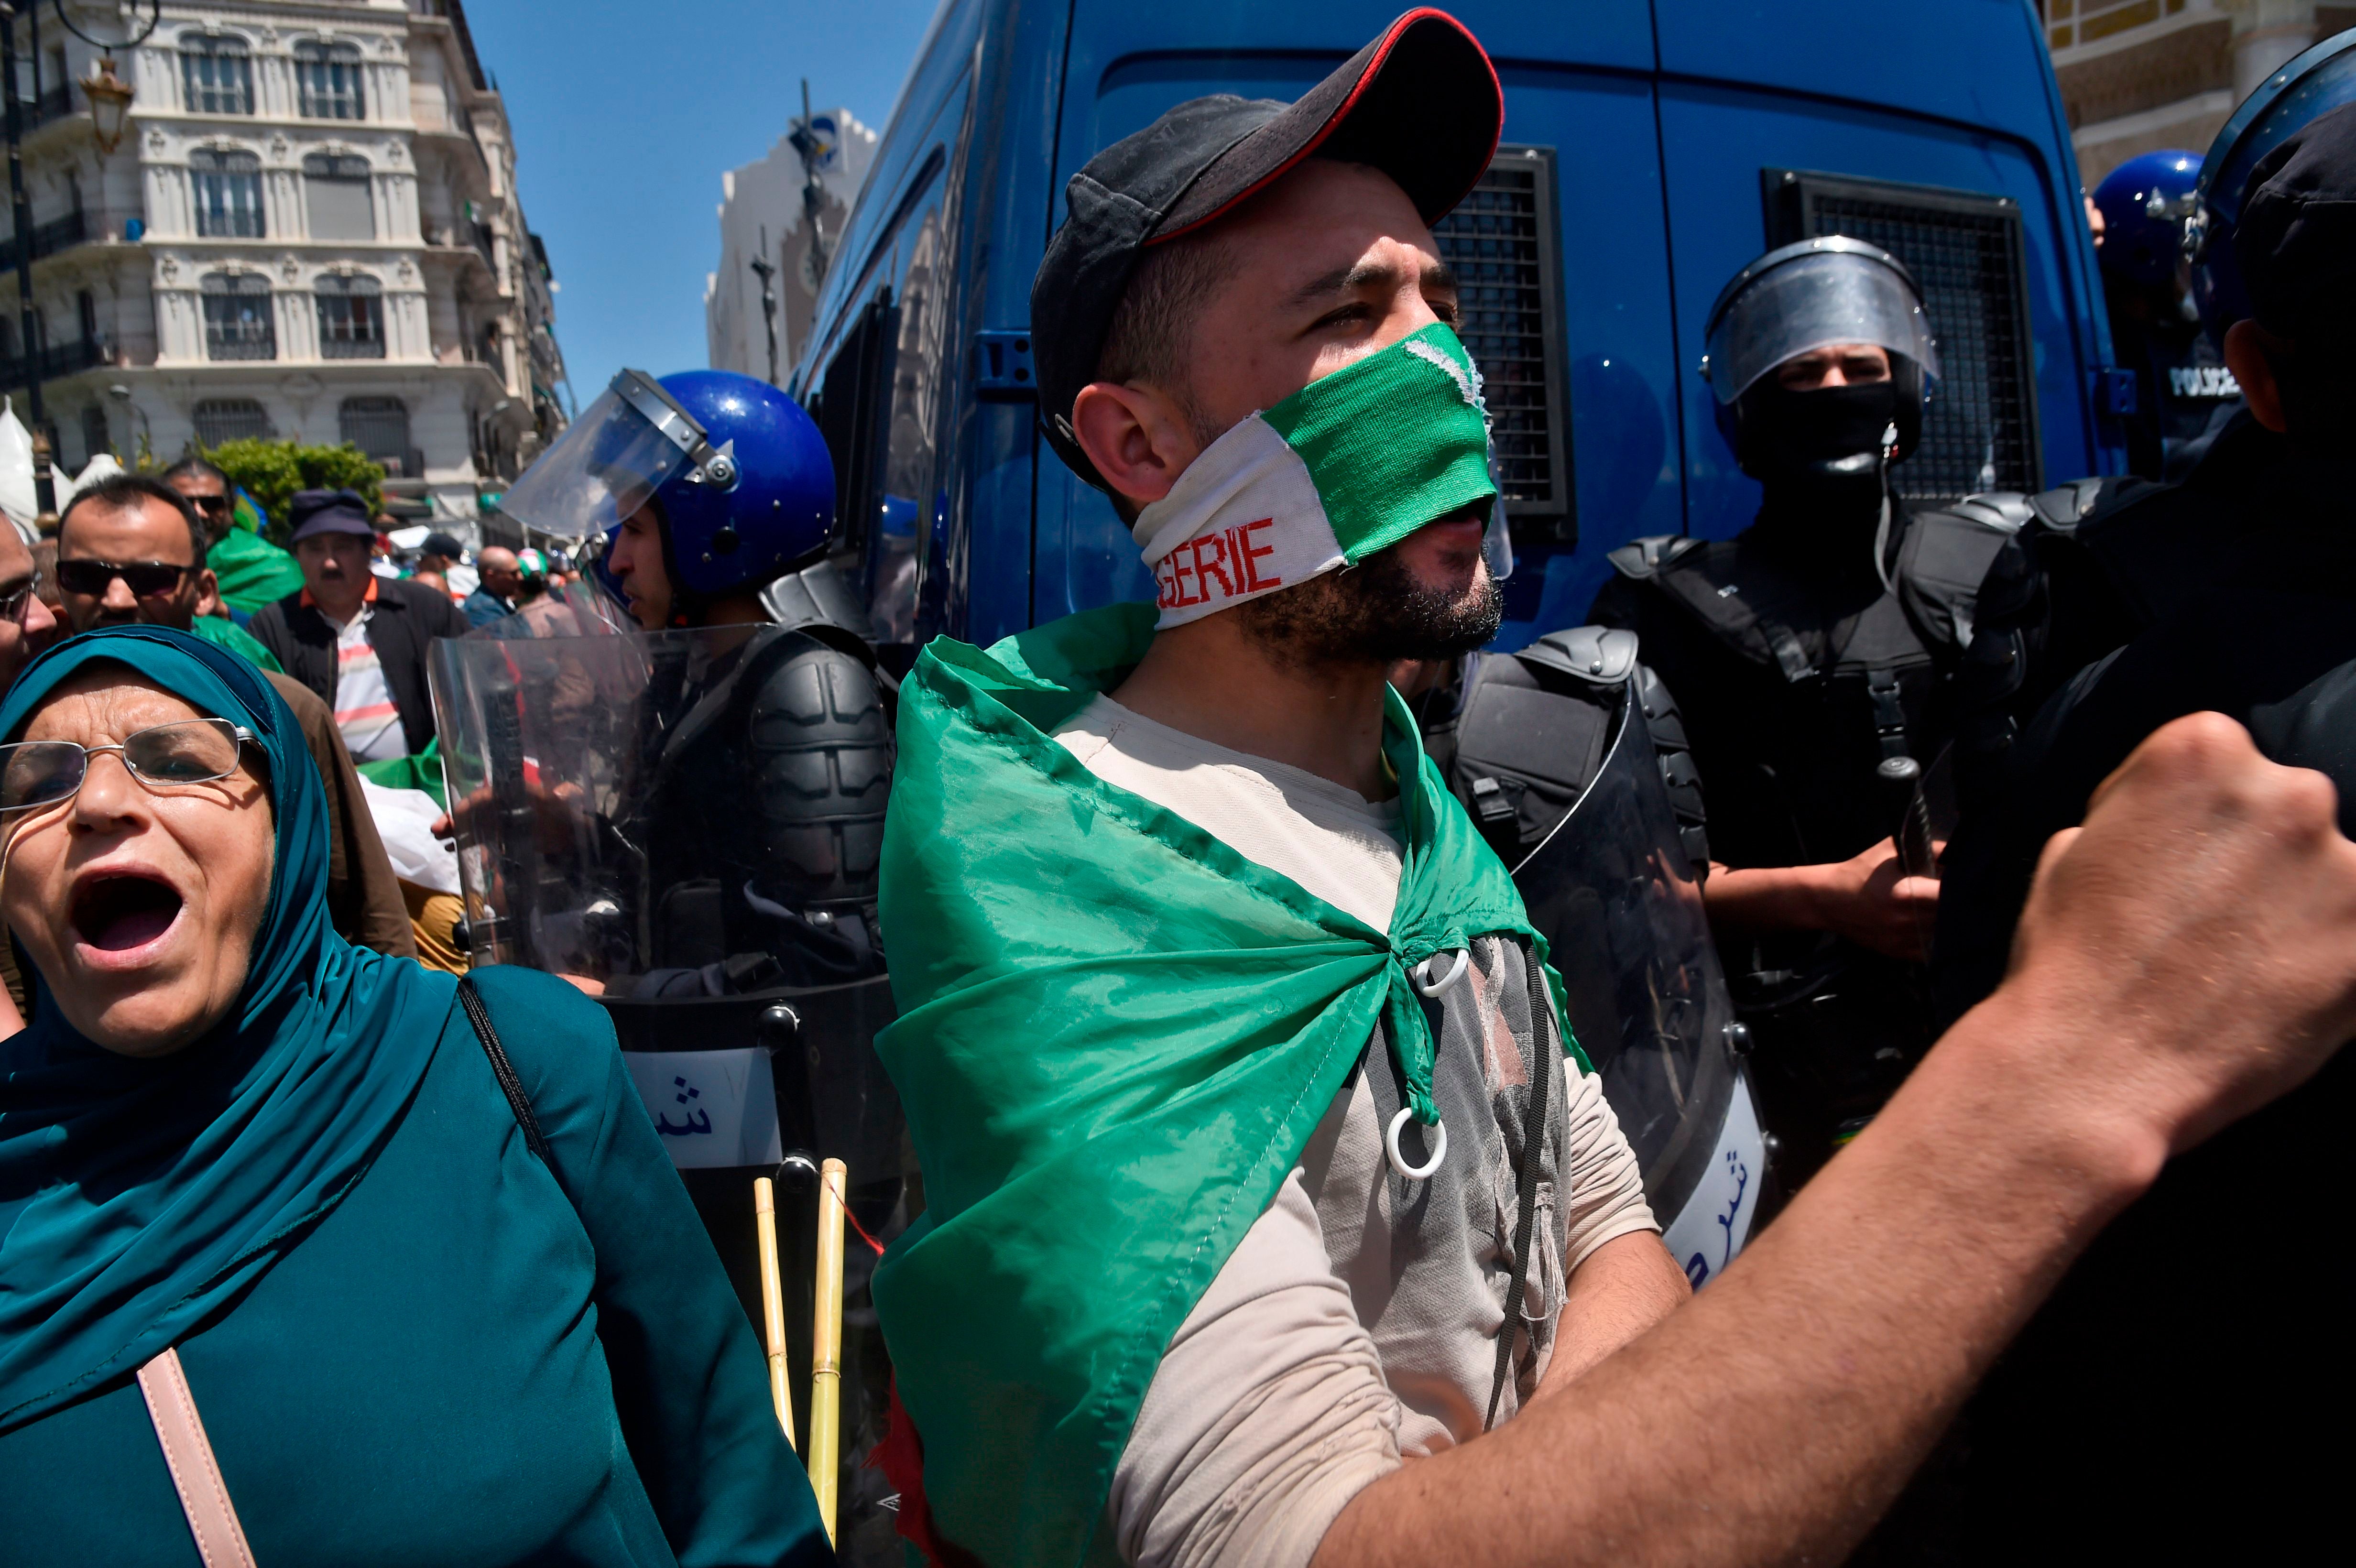 File photo: Algerian protesters draped in national flags chant slogans outside the central post office during an anti-government demonstration in the capital Algiers, 17 May 2019